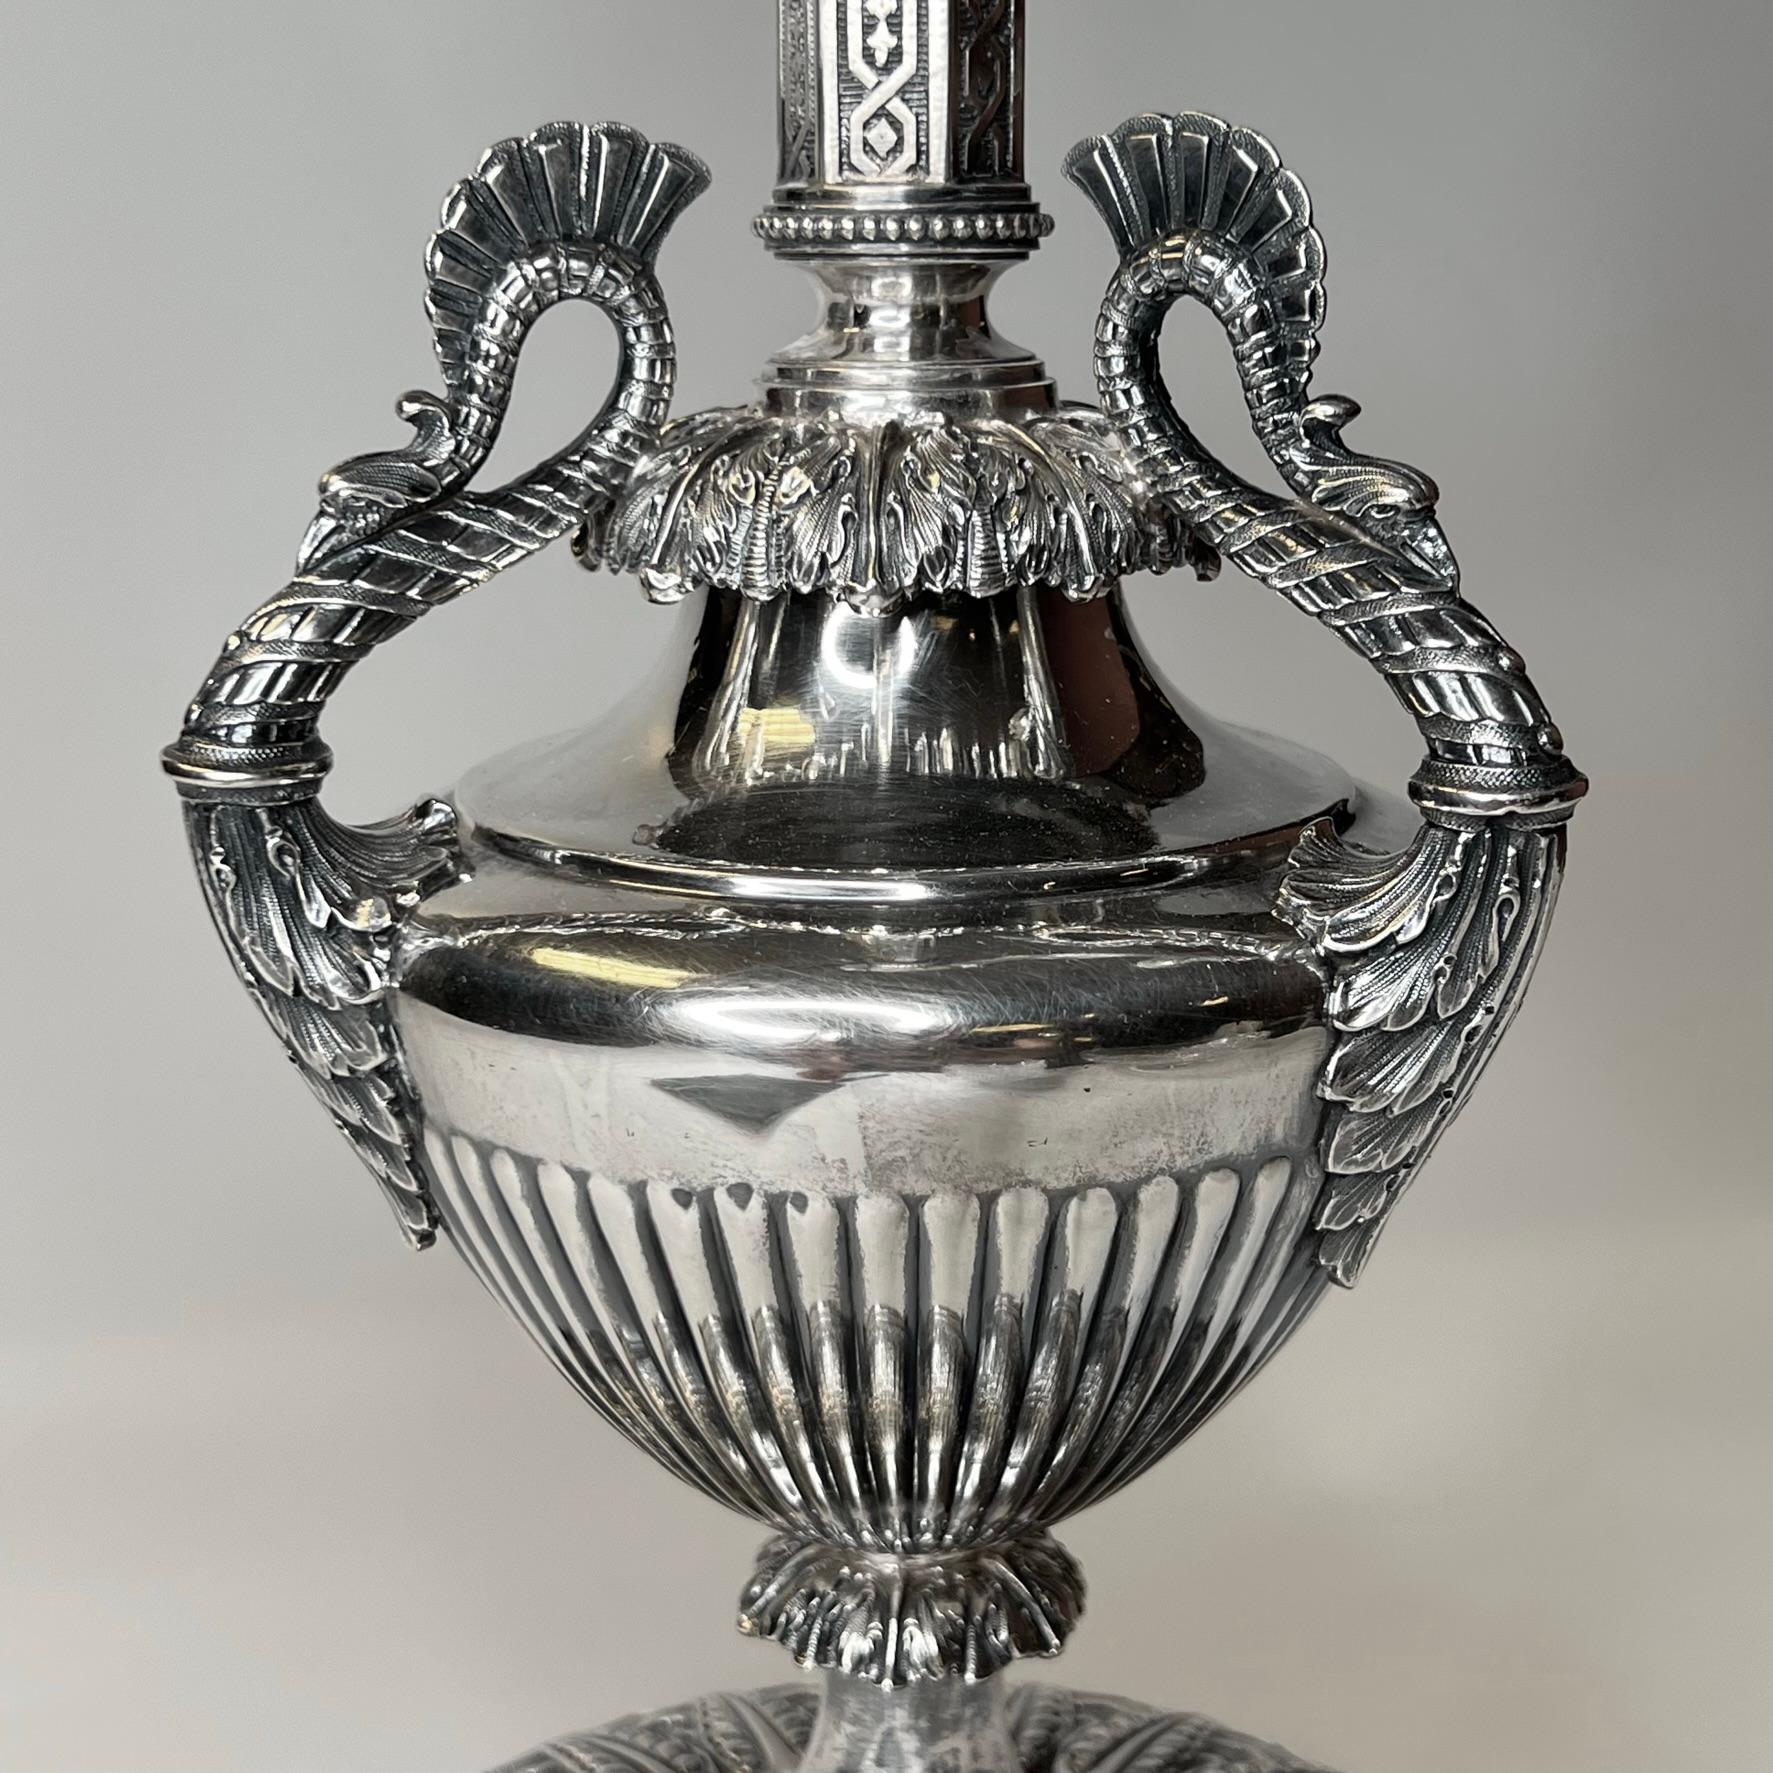 Victorian English Sterling Epergne Centerpiece by Manoah Rhodes & Sons c 1890 For Sale 1